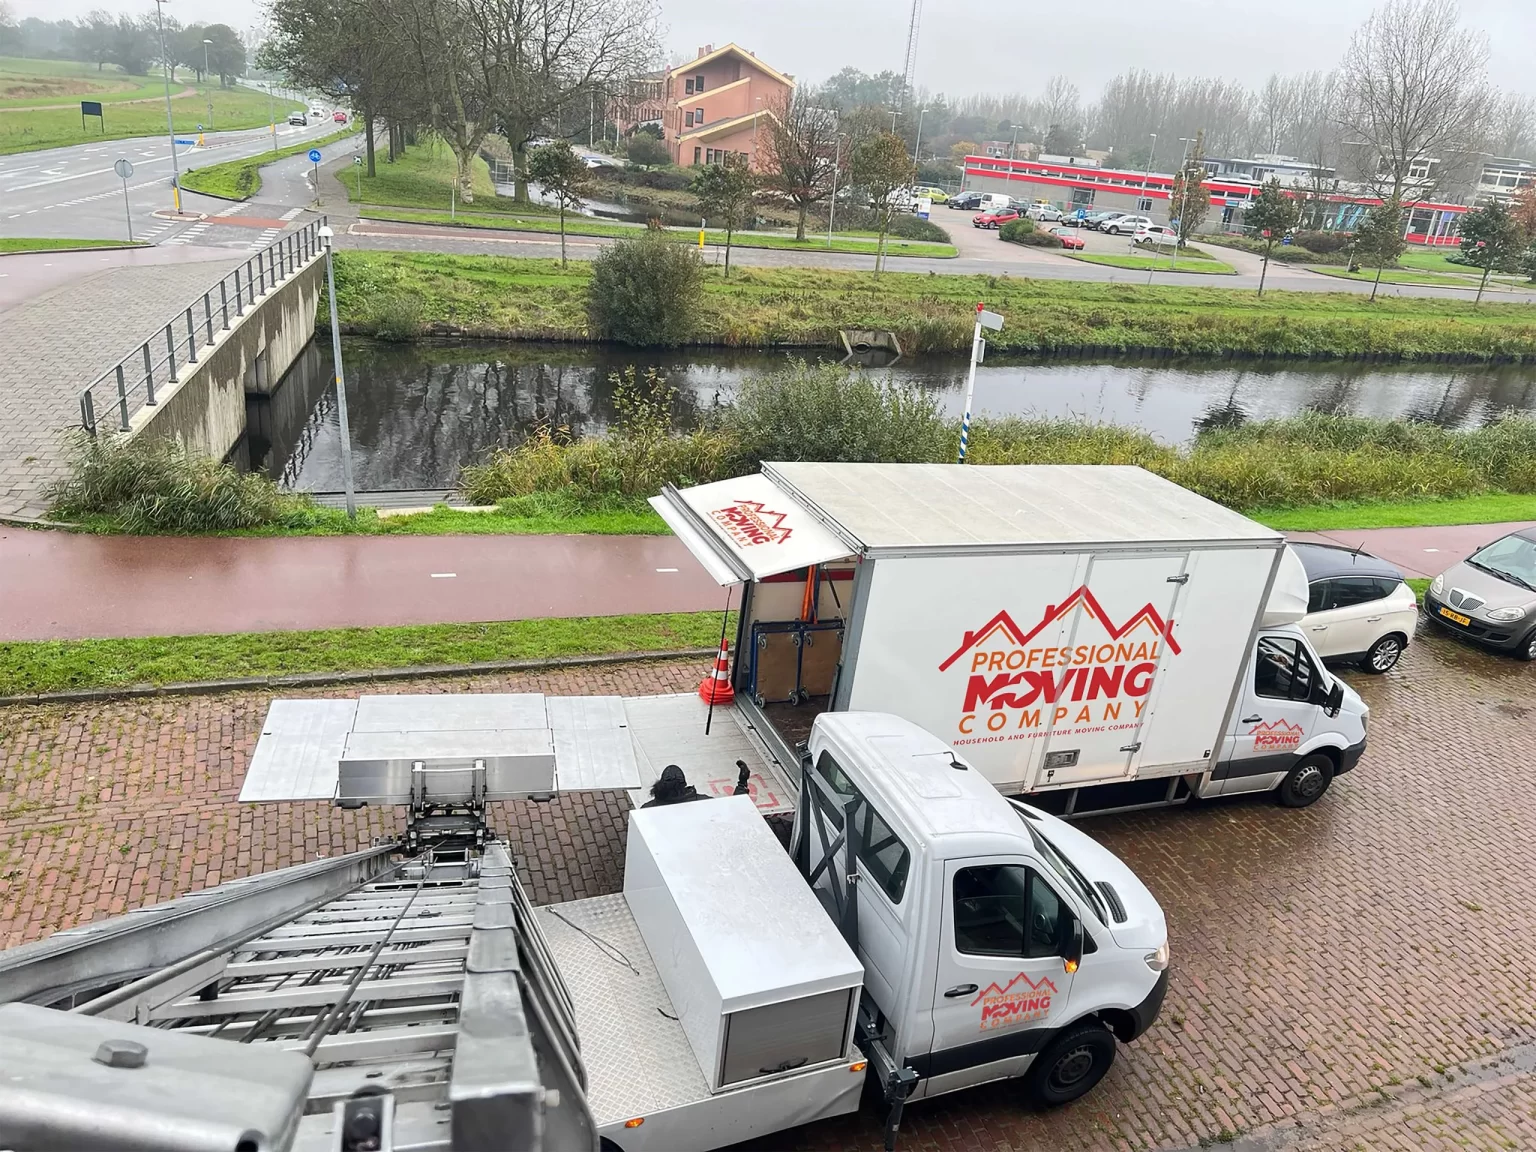 Dynamic Moving Services in Bunschoten